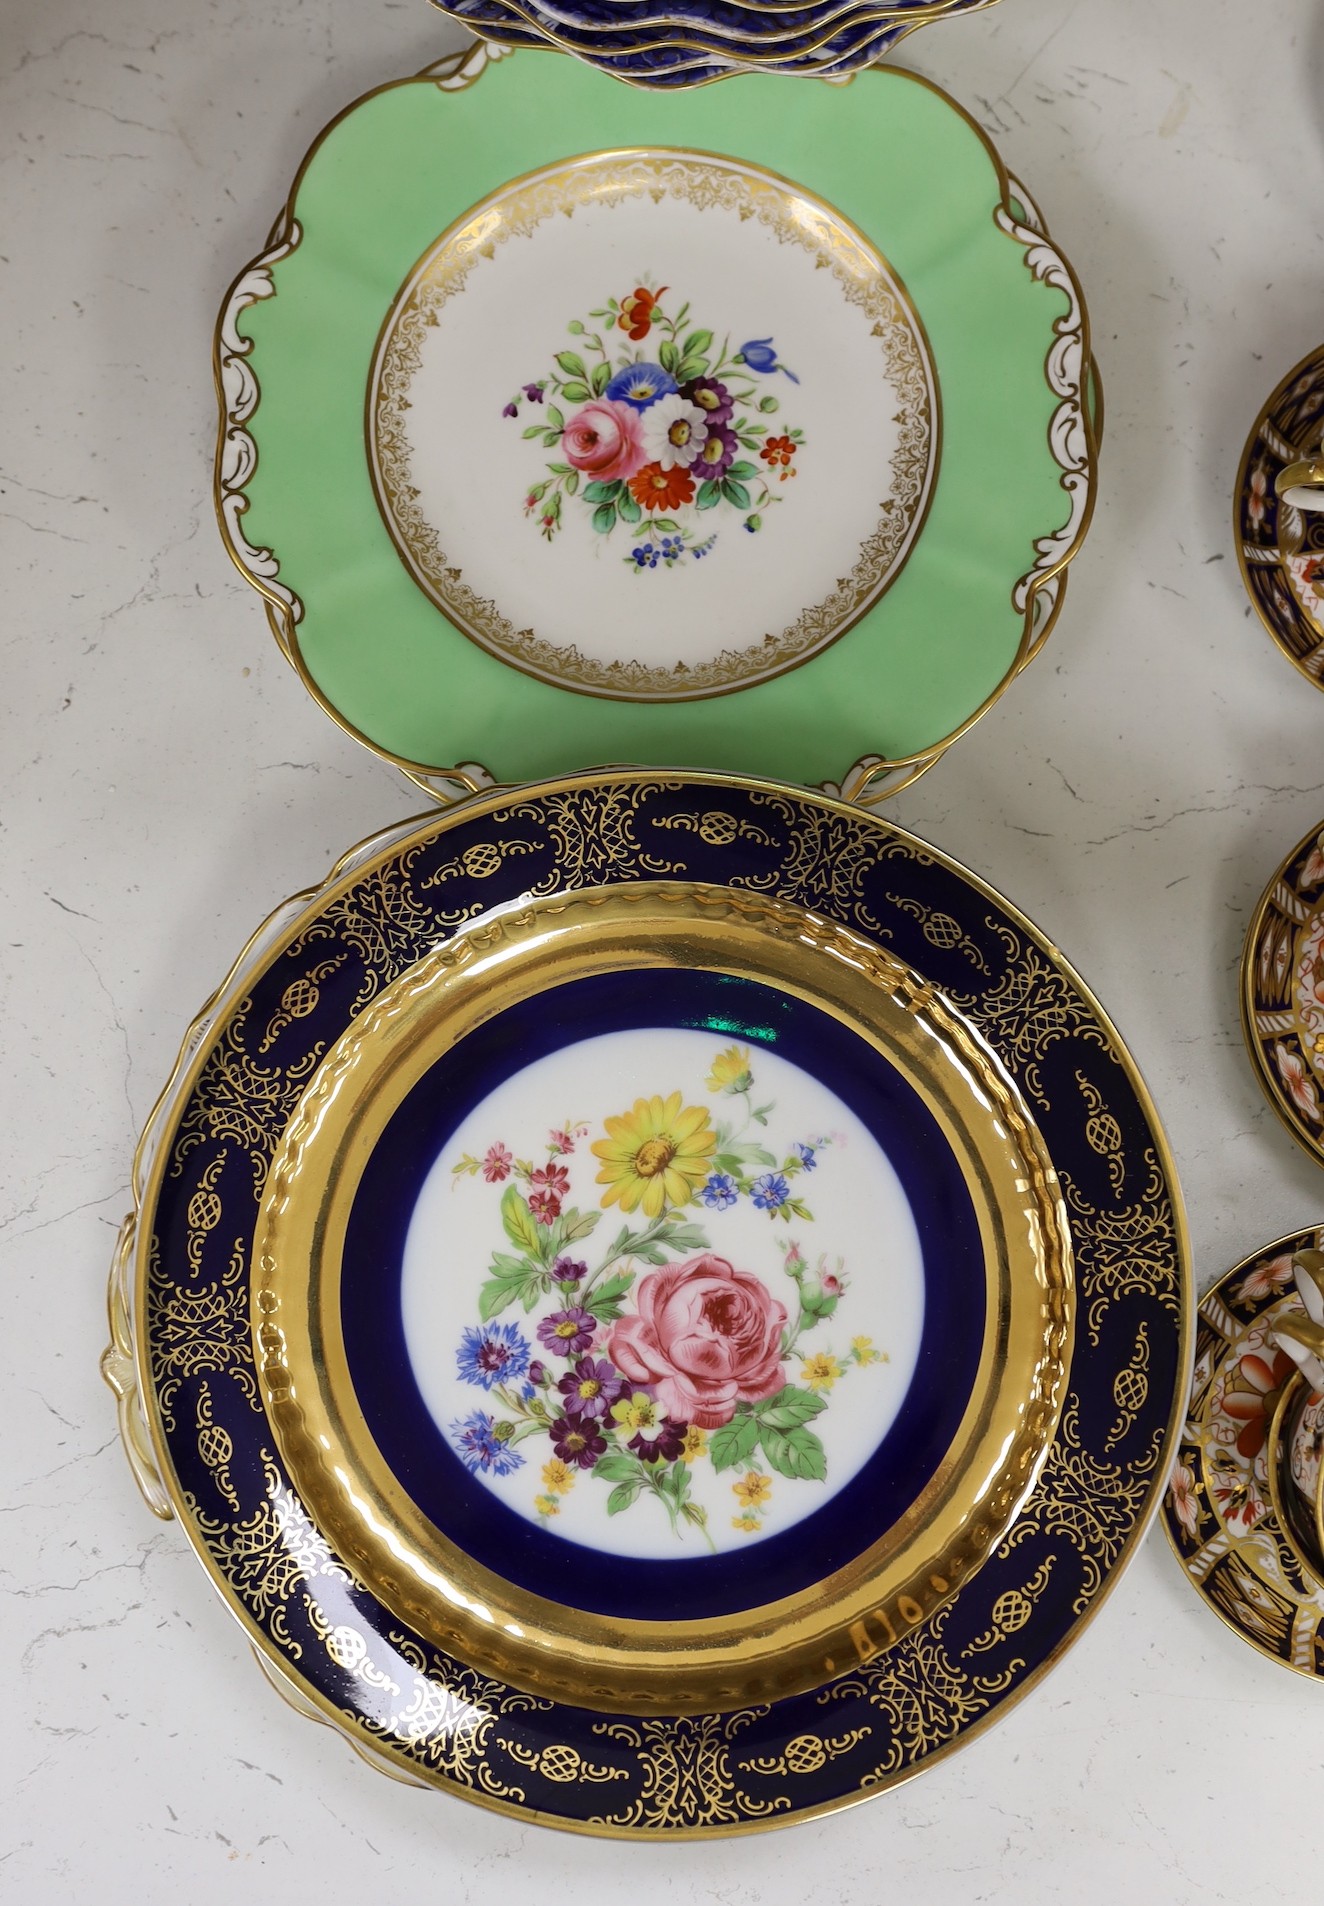 A selection of mixed 19th century ceramics, to include A Wedgwood aesthetic period part dessert service, Royal Crown Derby tea ware, a silver mounted decanter, etc.